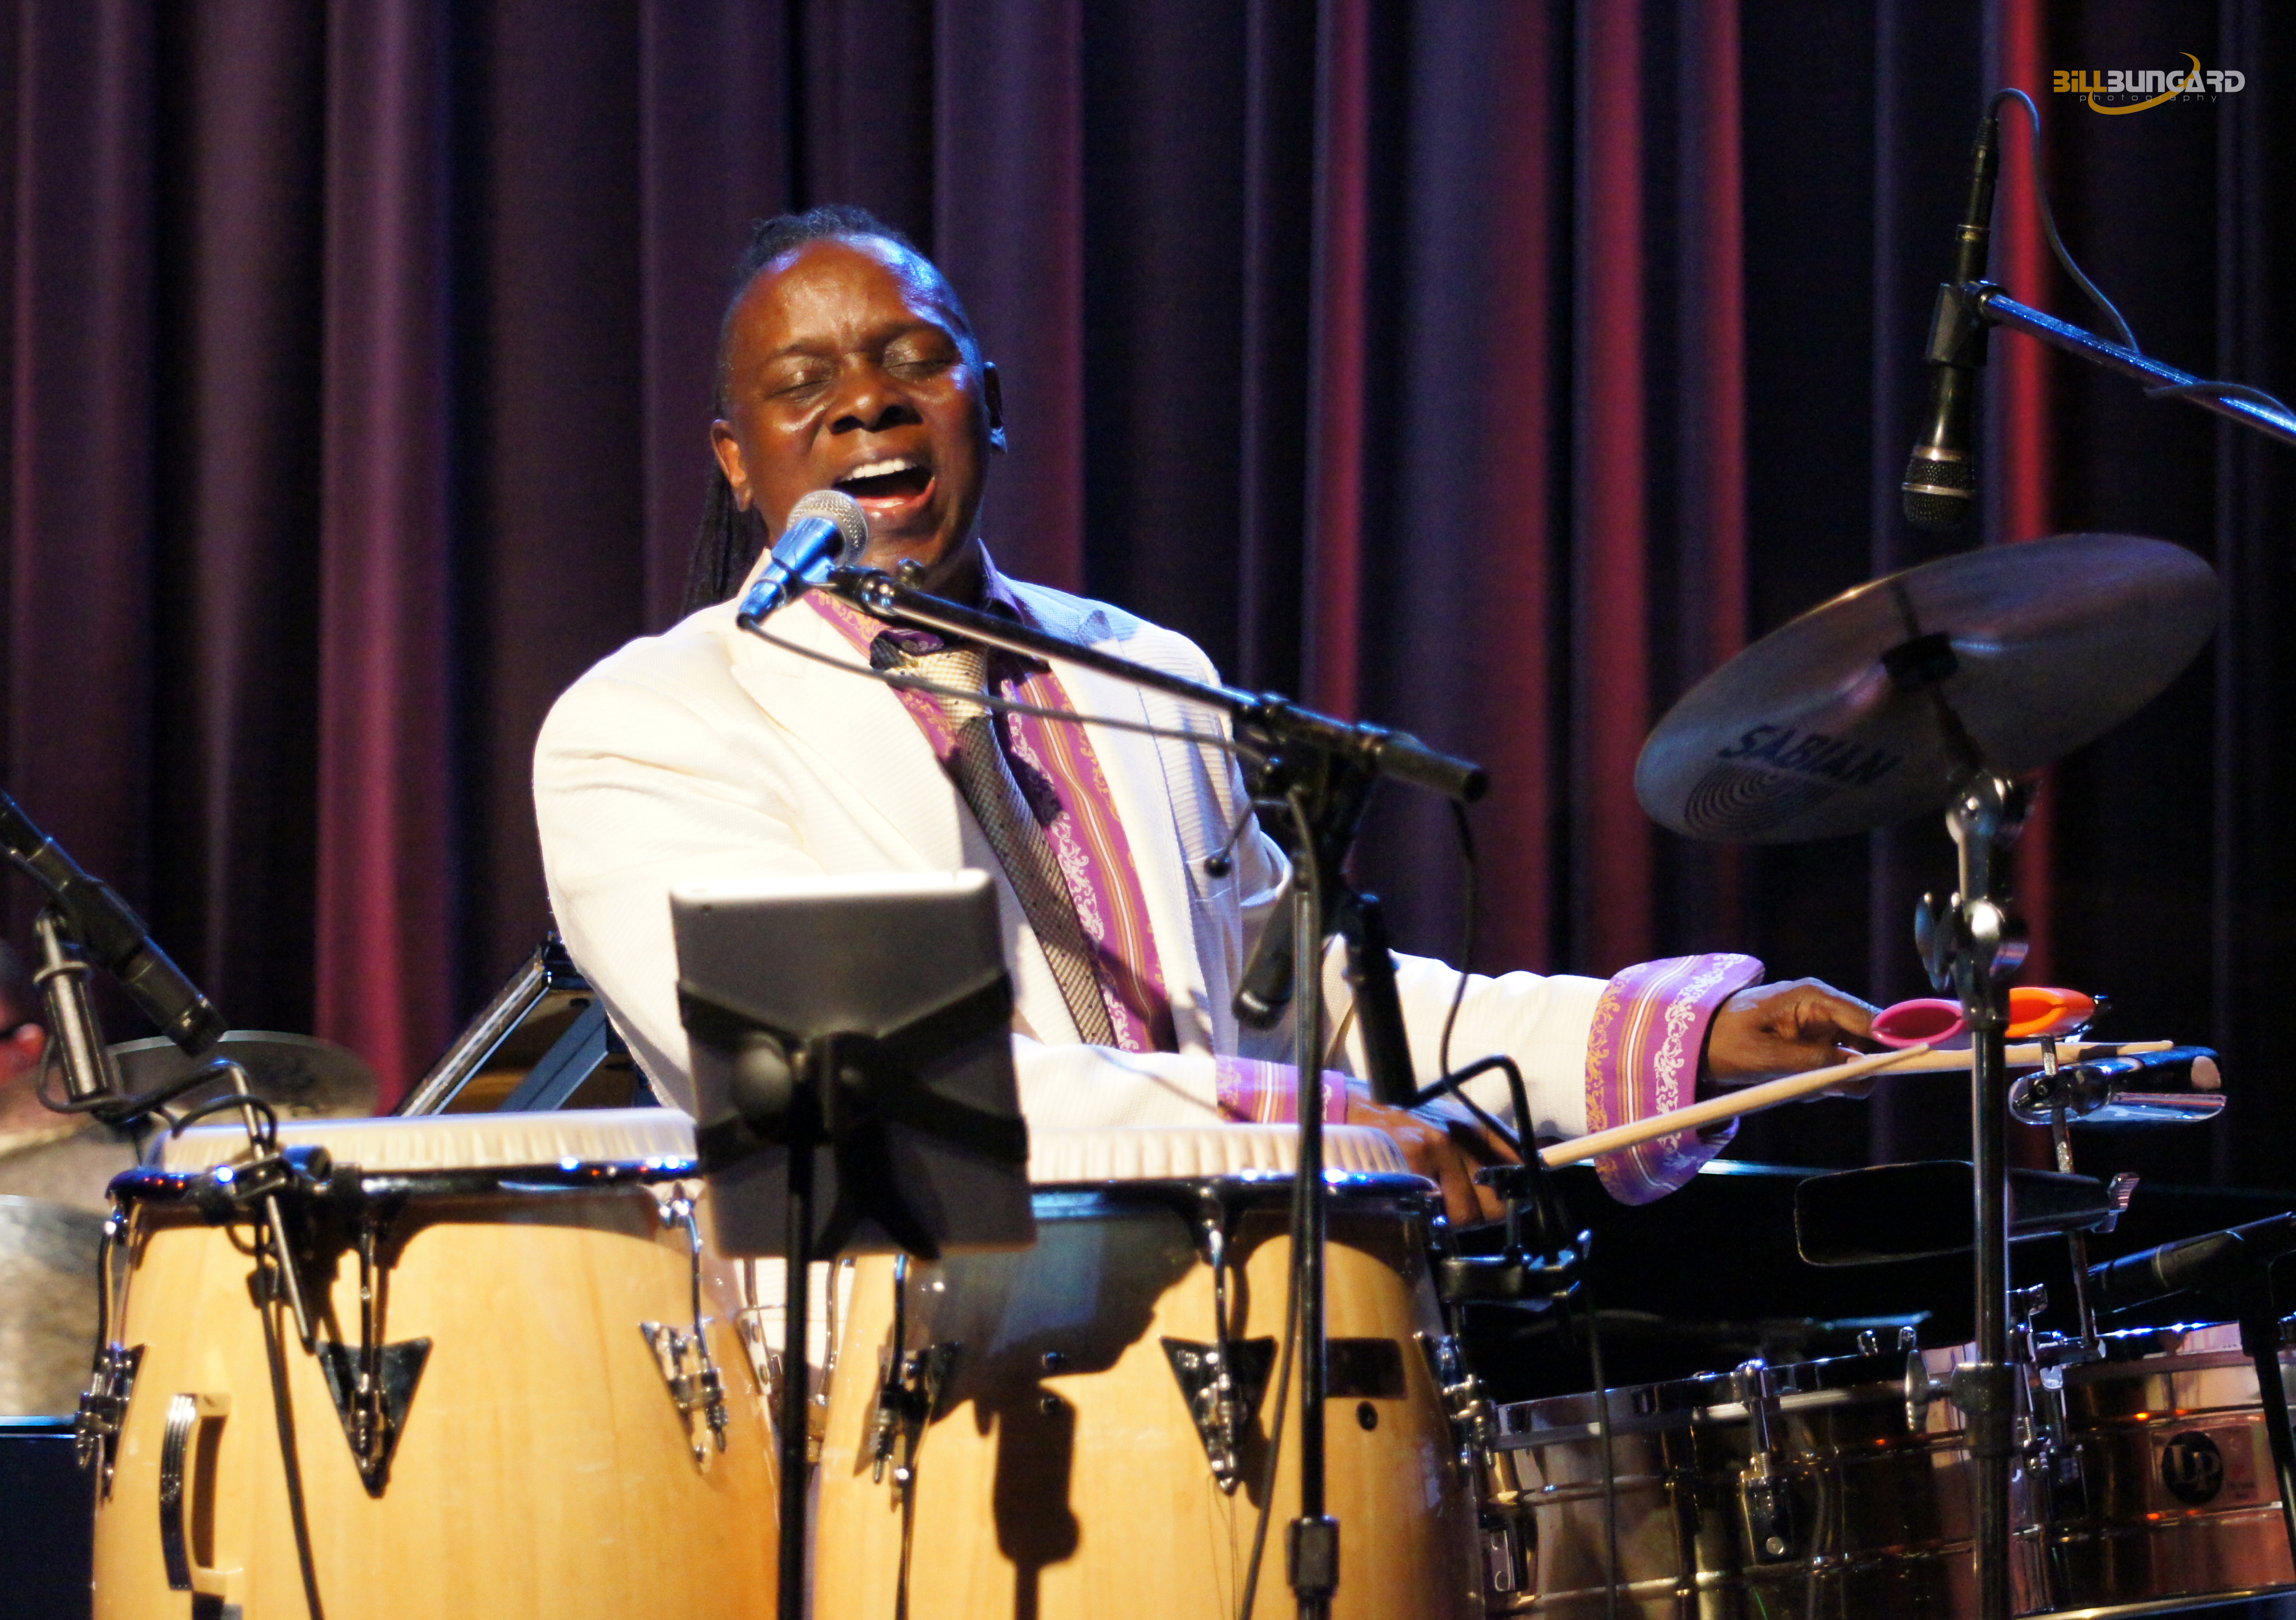 Philip Bailey at Jazz Alley (Photo by Bill Bungard)